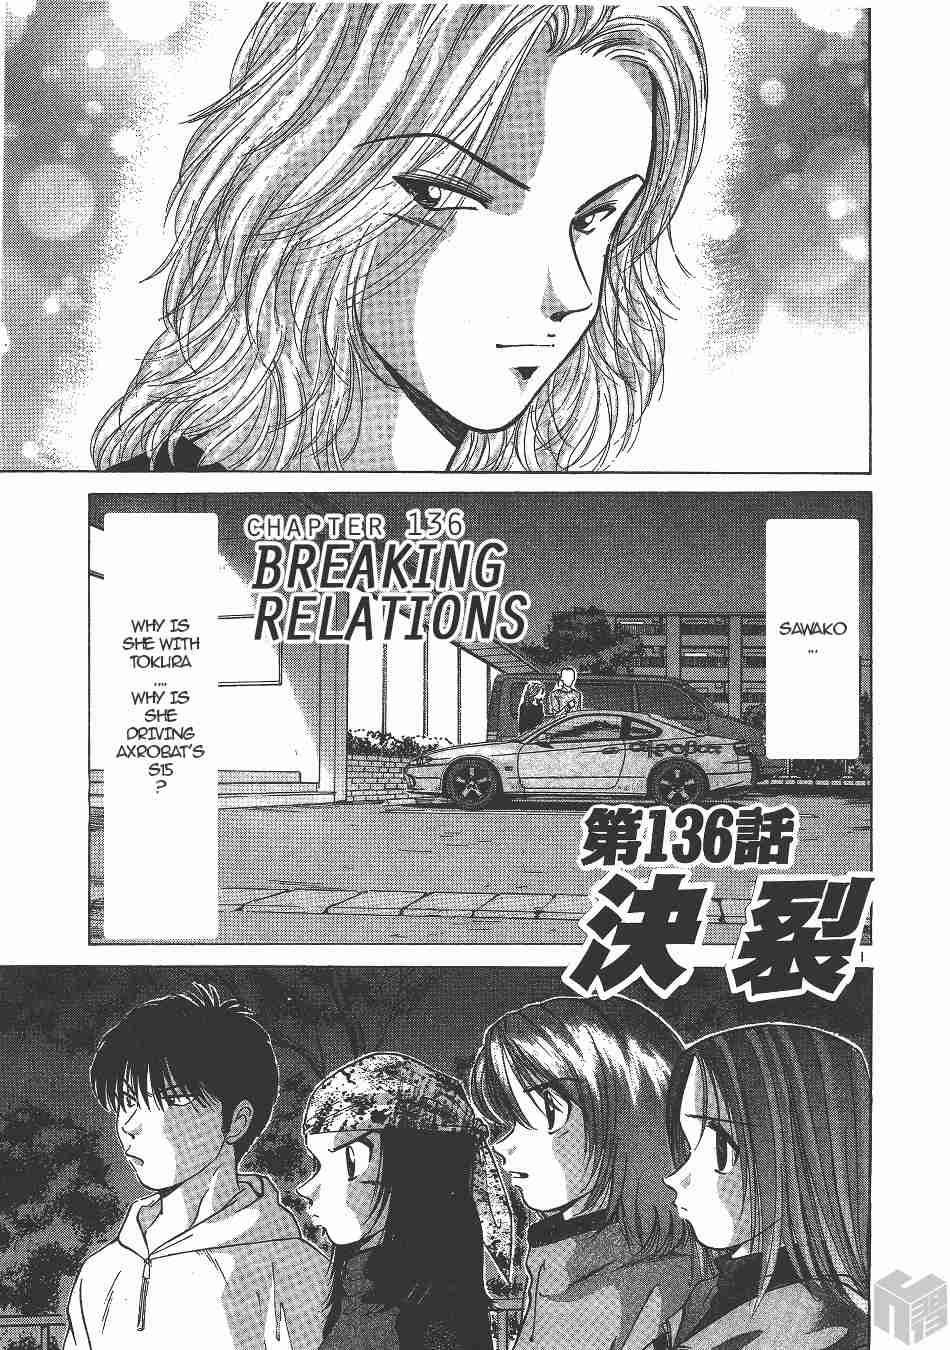 Over Rev! Vol. 12 Ch. 136 Breaking Relations